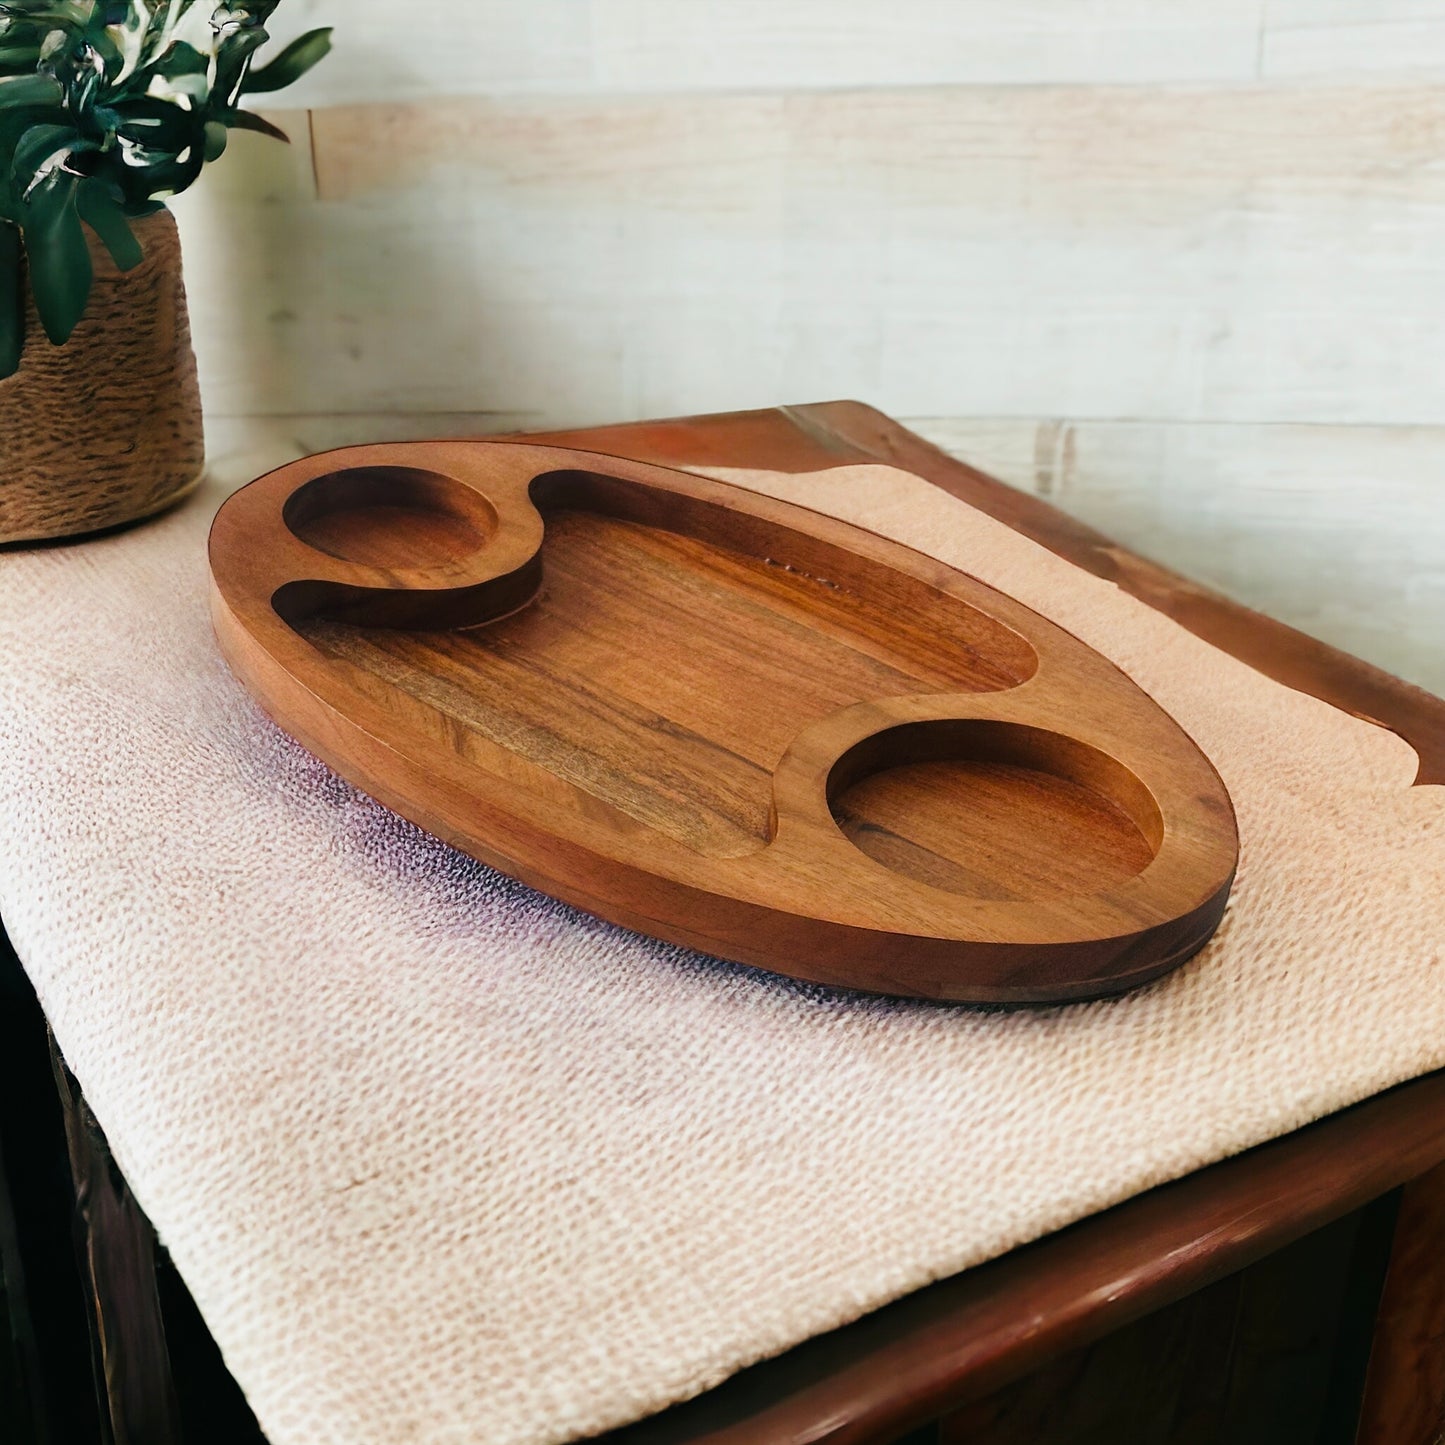 Acacia wood duo delight serving chip and dip platter - single